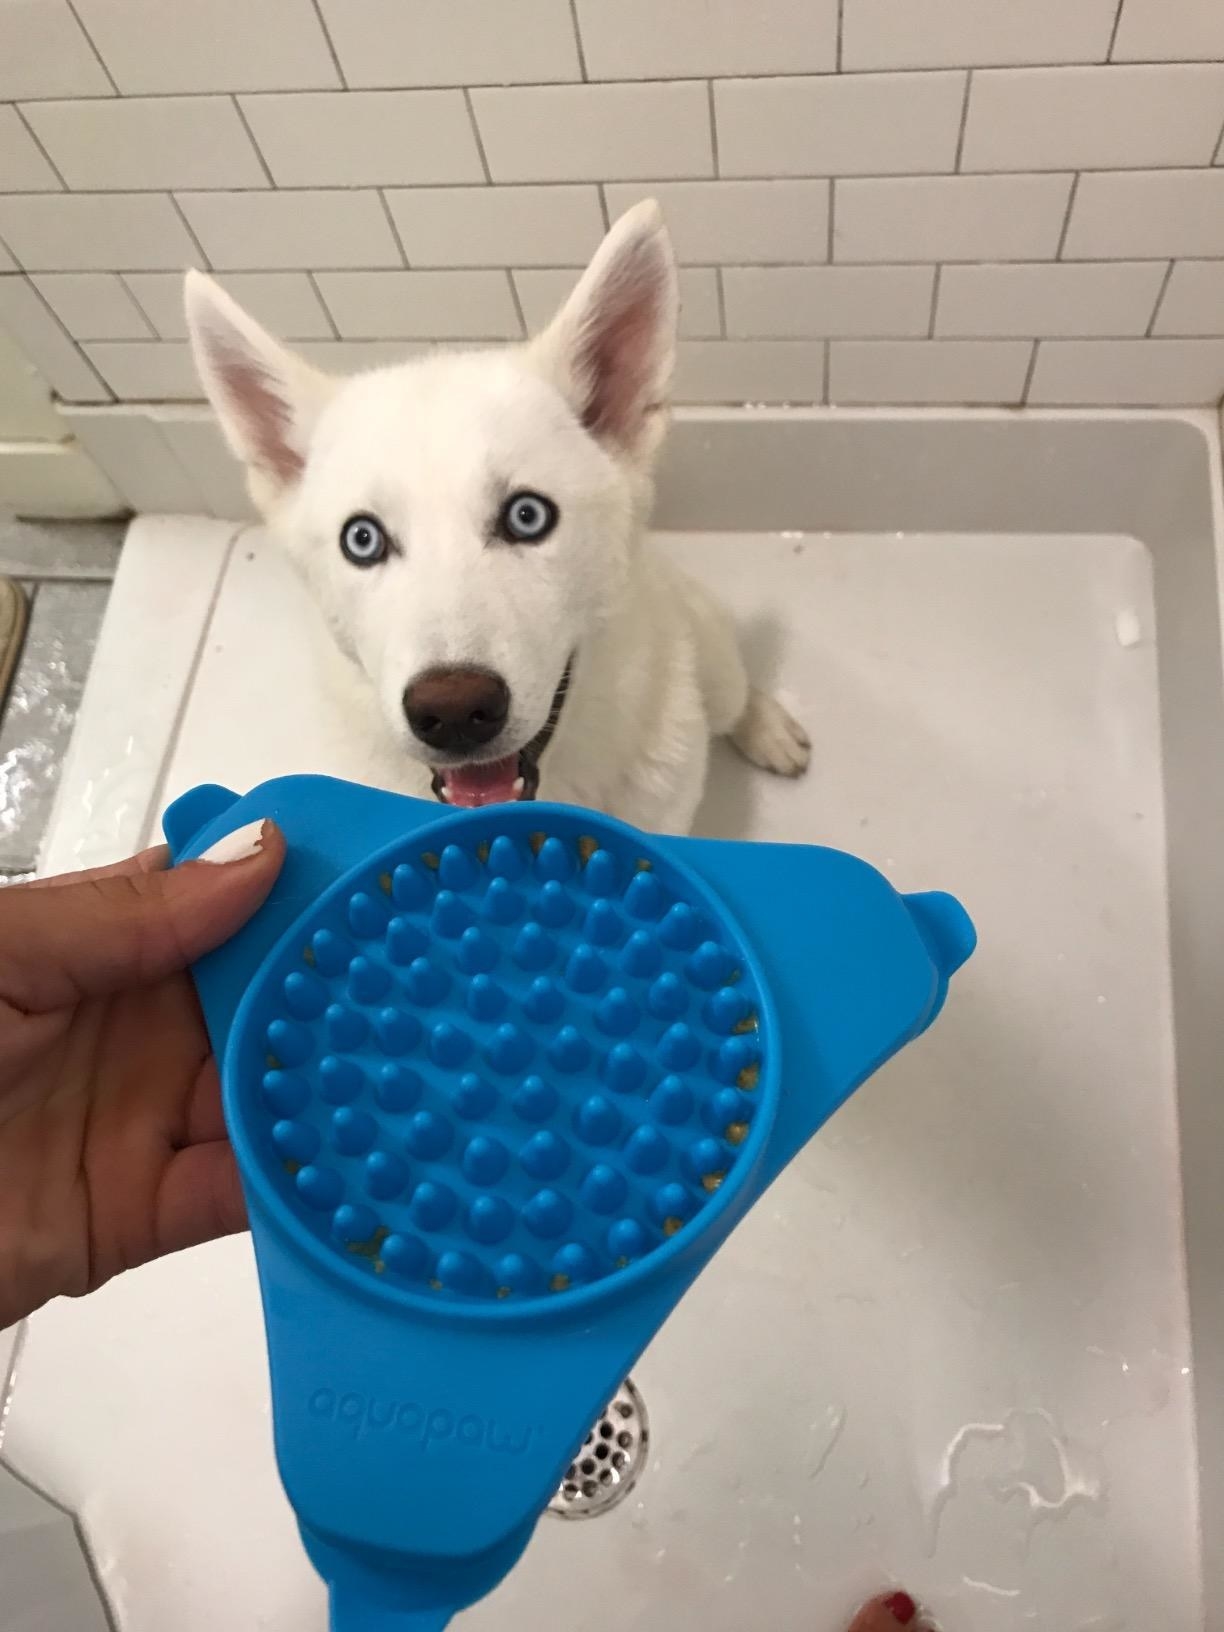 A white Husky dog in the shower looking happily at the Aquapaw dispenser. 